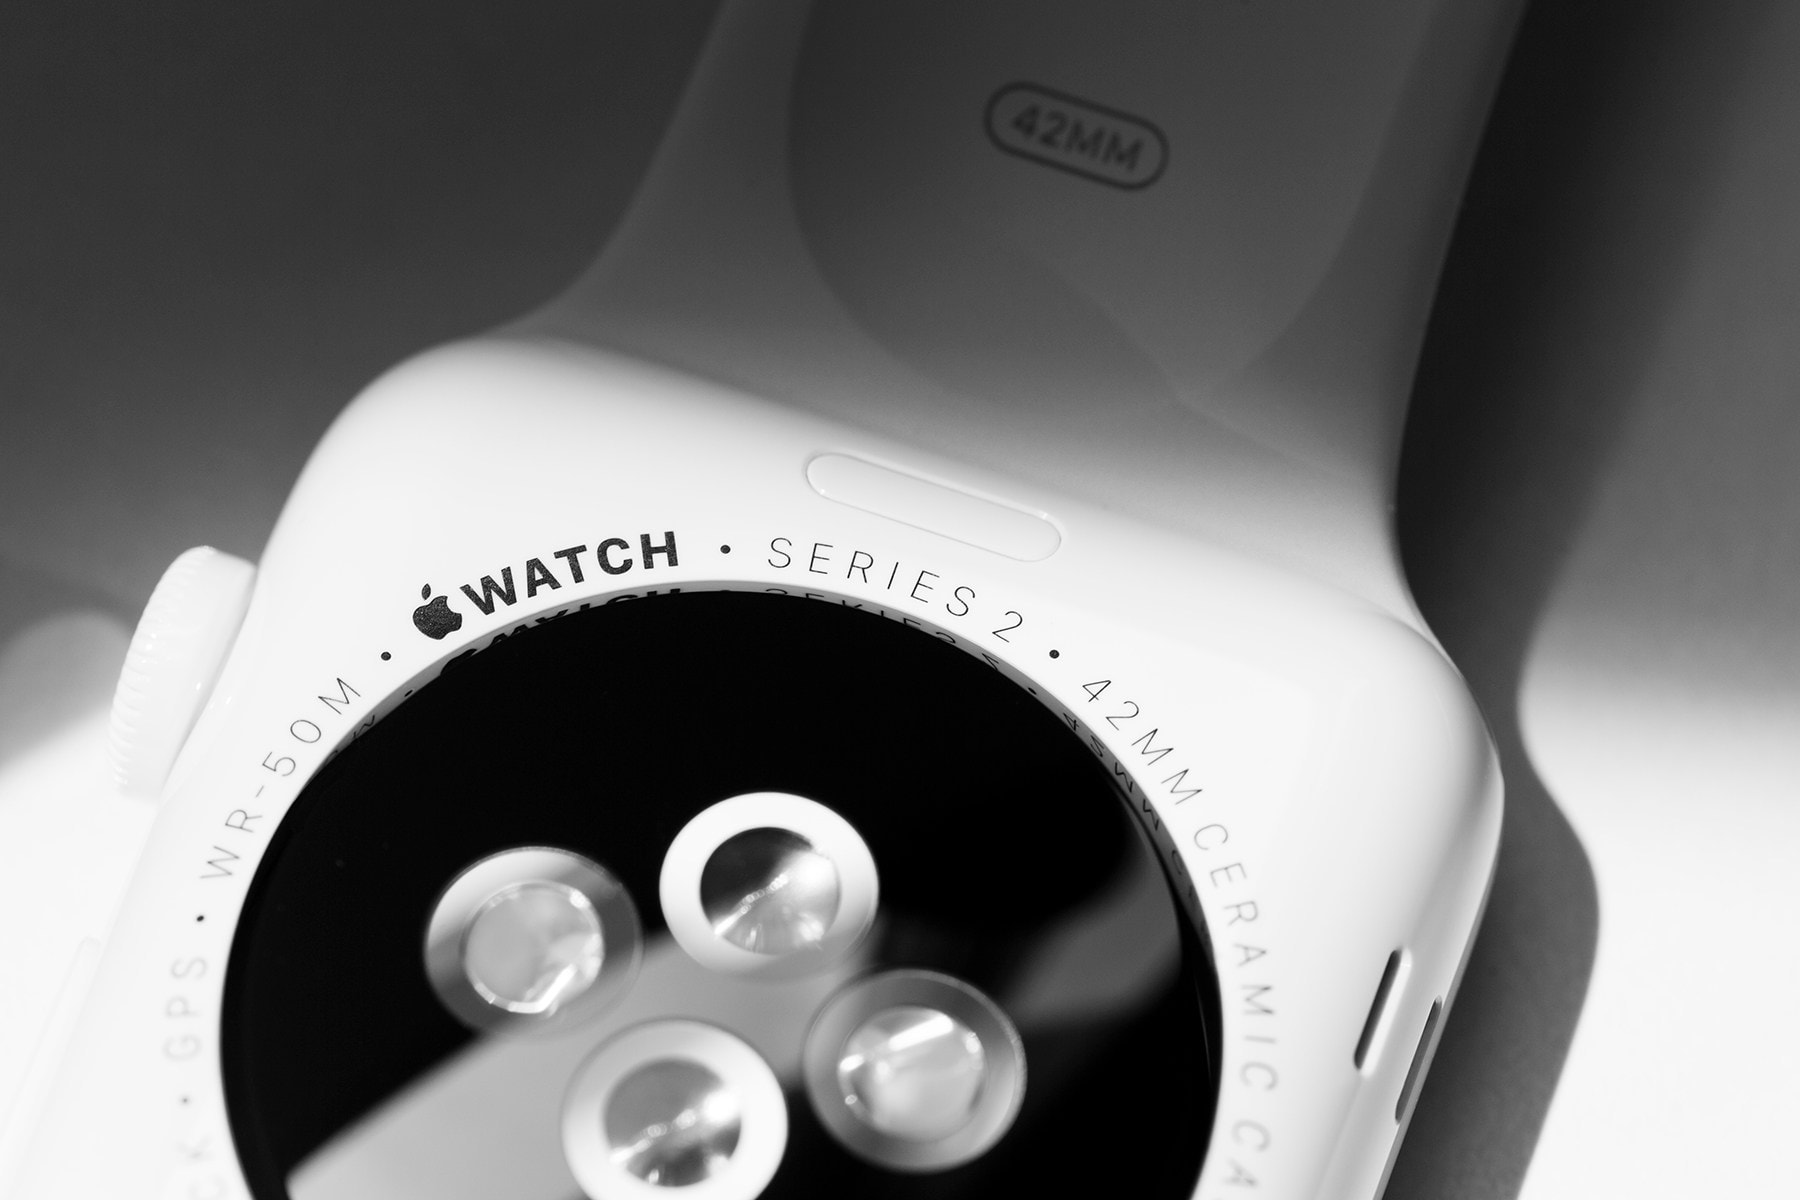 Apple Upgrades Its Apple Watch Series 2 with White Ceramic smartwatches zirconia